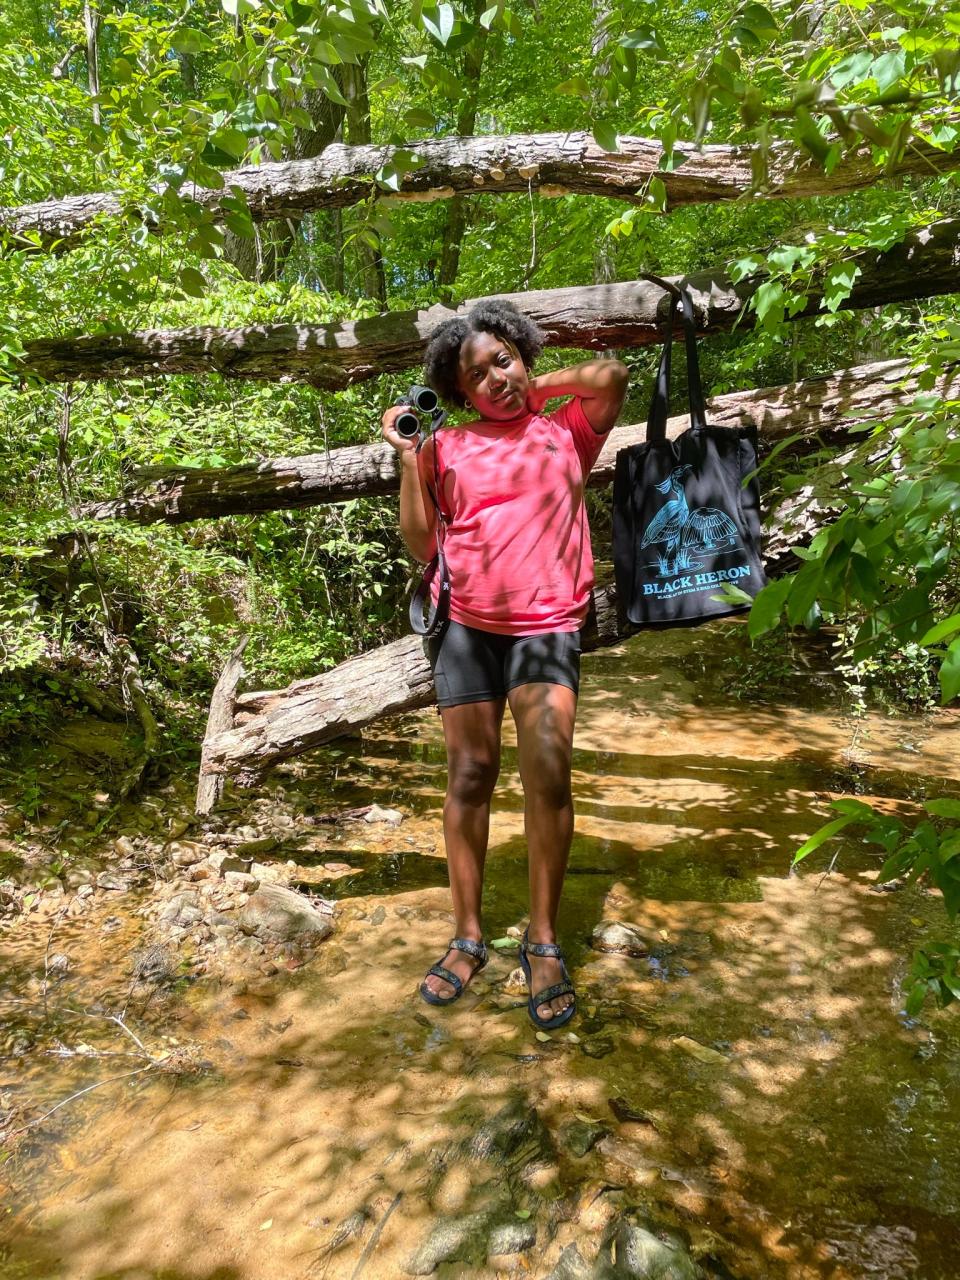 Chelsea Connor, a graduate student and herpetologist at Clemson University, helps organize Black Birders Week. Connor has personally dealt with racism as she pursued an education and career in the sciences.